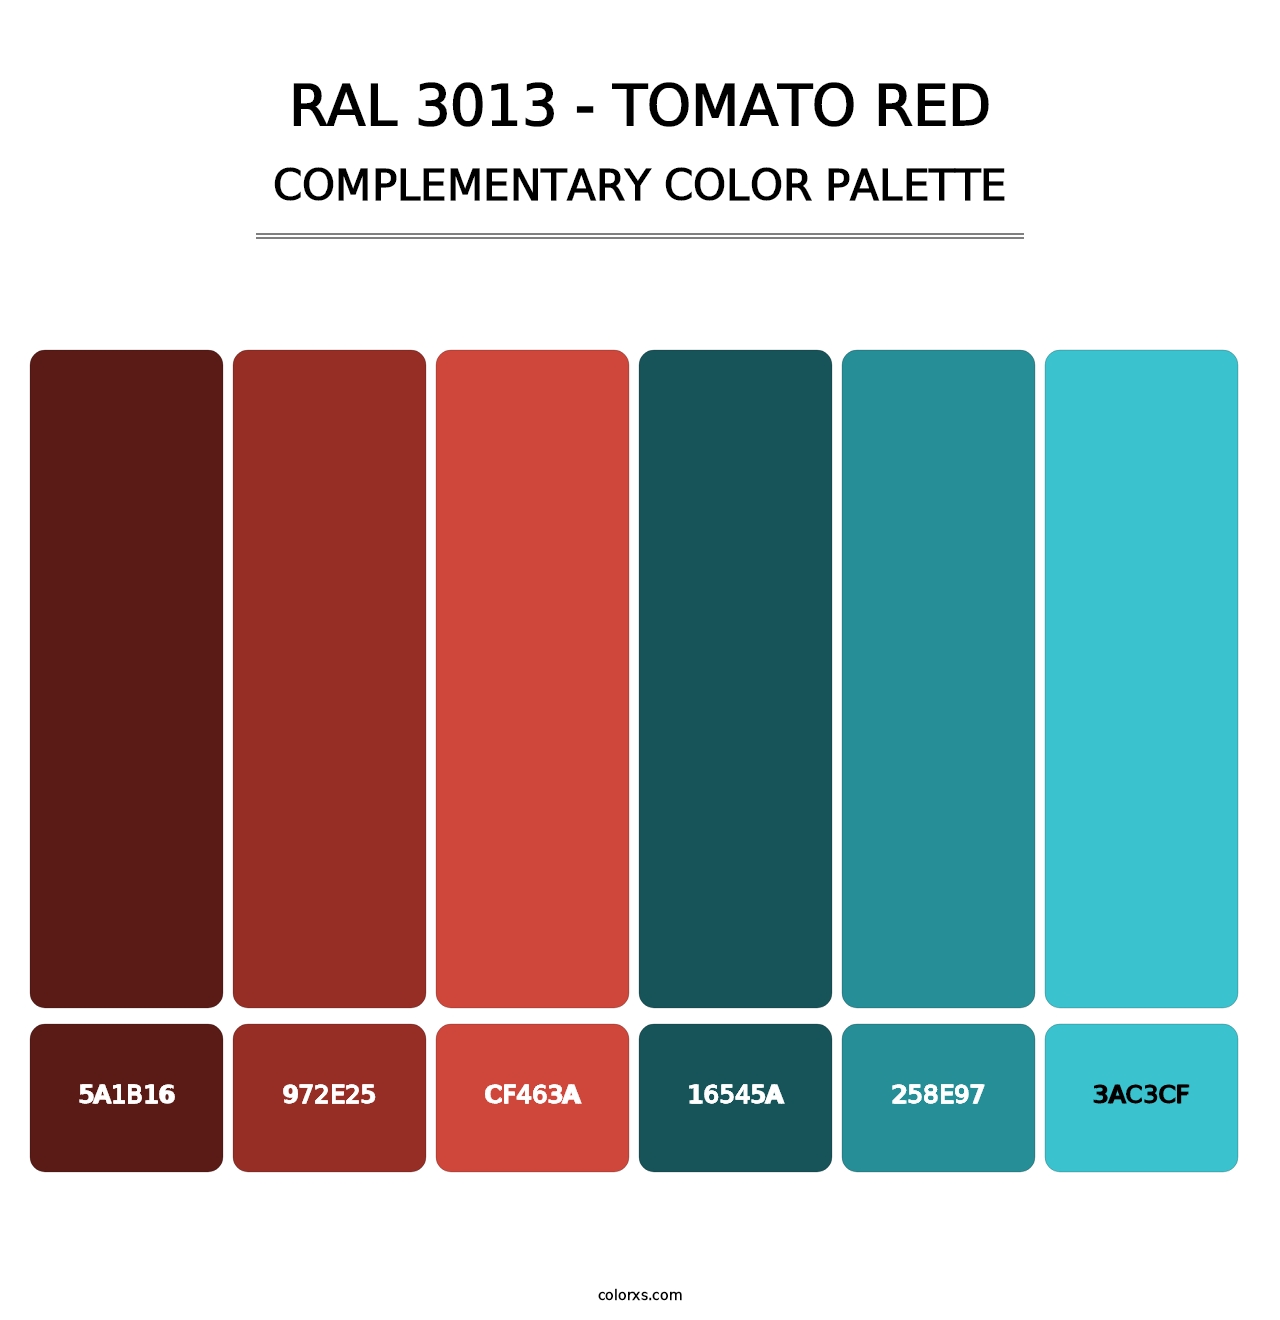 RAL 3013 - Tomato Red - Complementary Color Palette